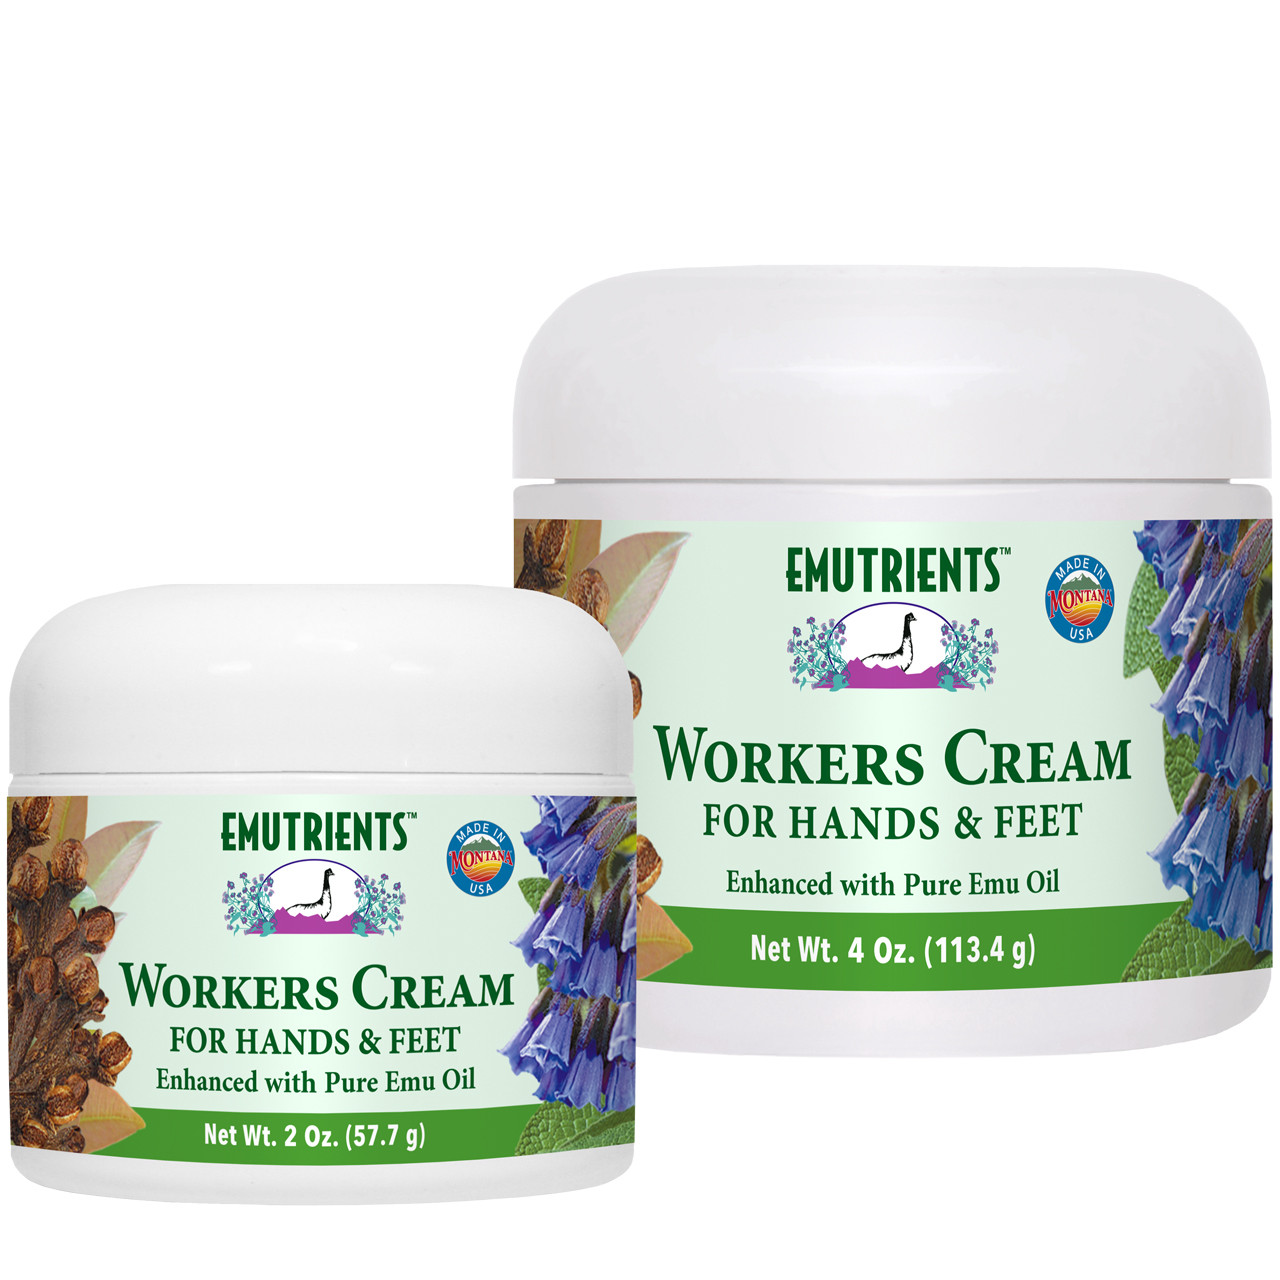 EMUTRIENTS™ Workers Cream for Hands & Feet
Real relief for hard working people!